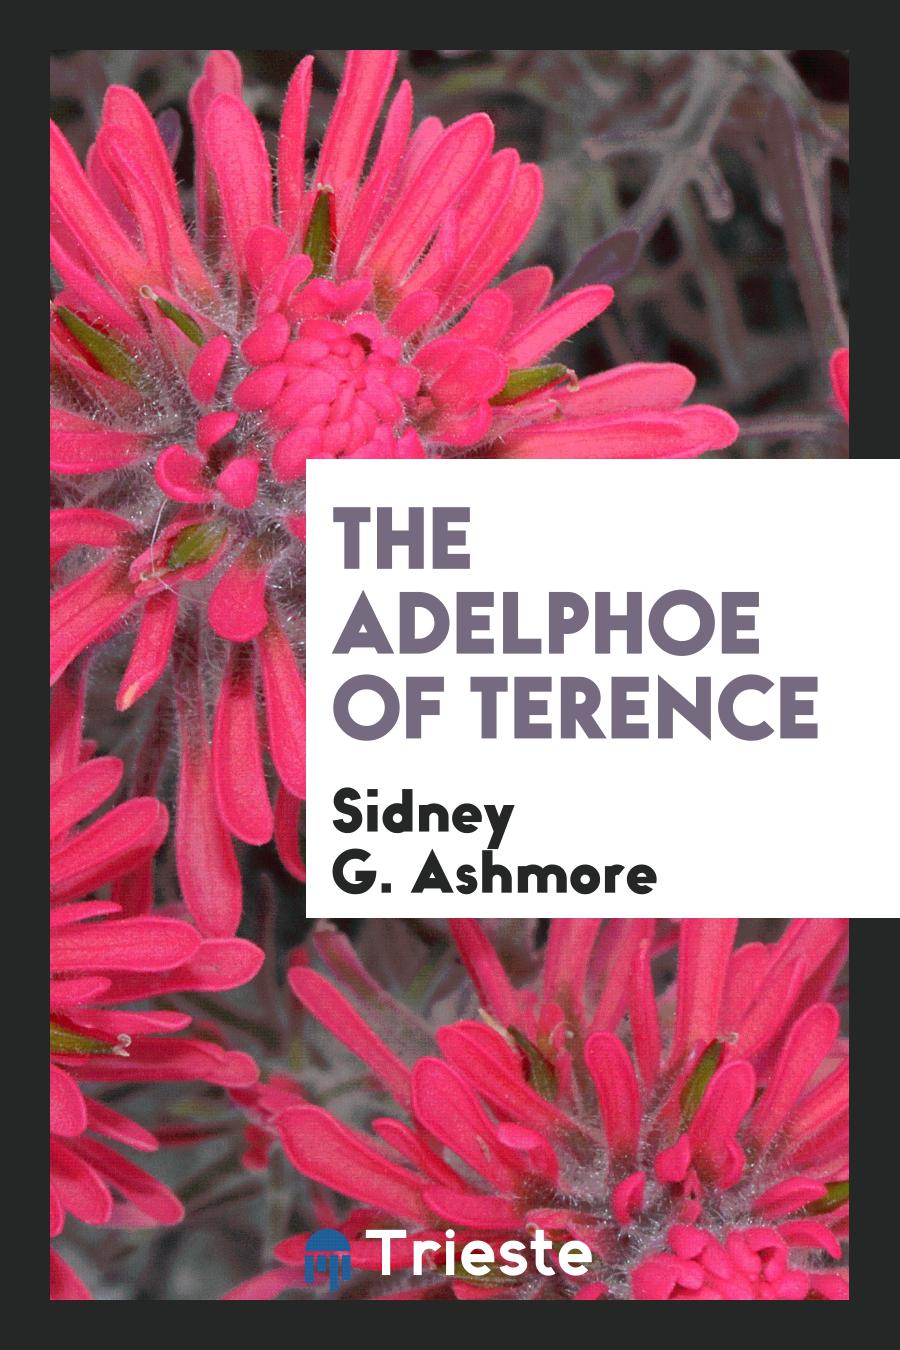 The Adelphoe of Terence